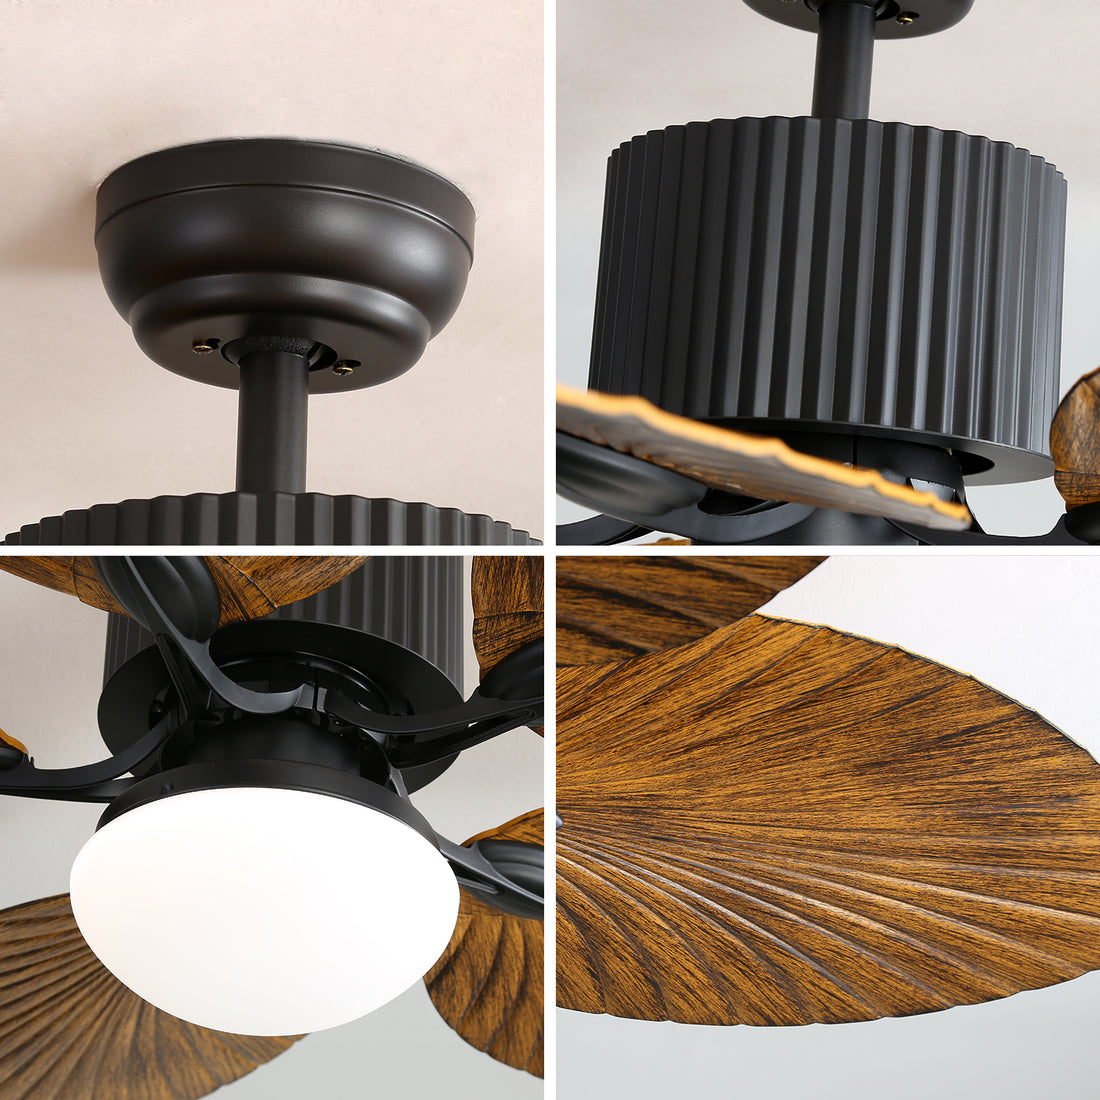 48 Inch Tropical Ceiling Fan With 3 Speed Wind 3